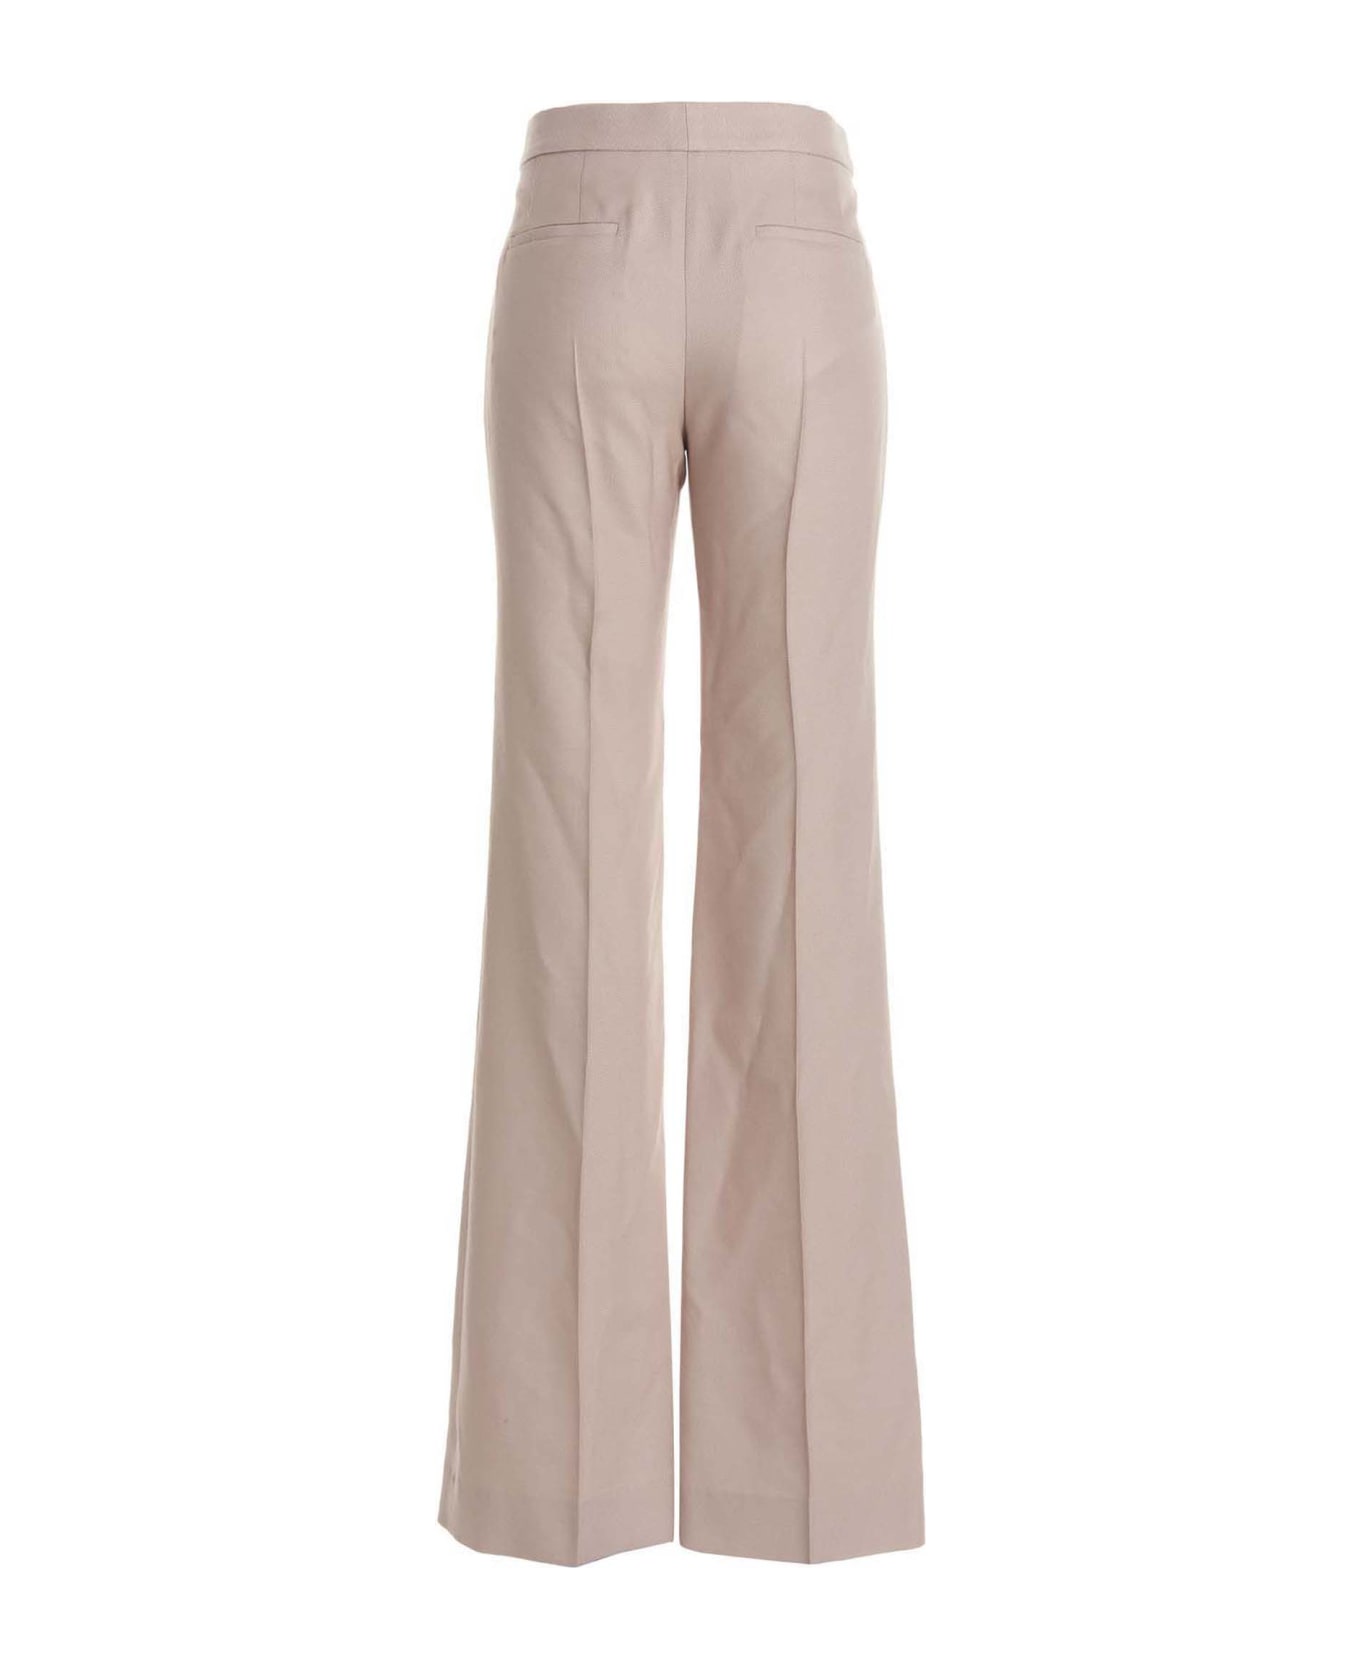 Chloé High-rise Flared Pants - LIGHT PINK ボトムス